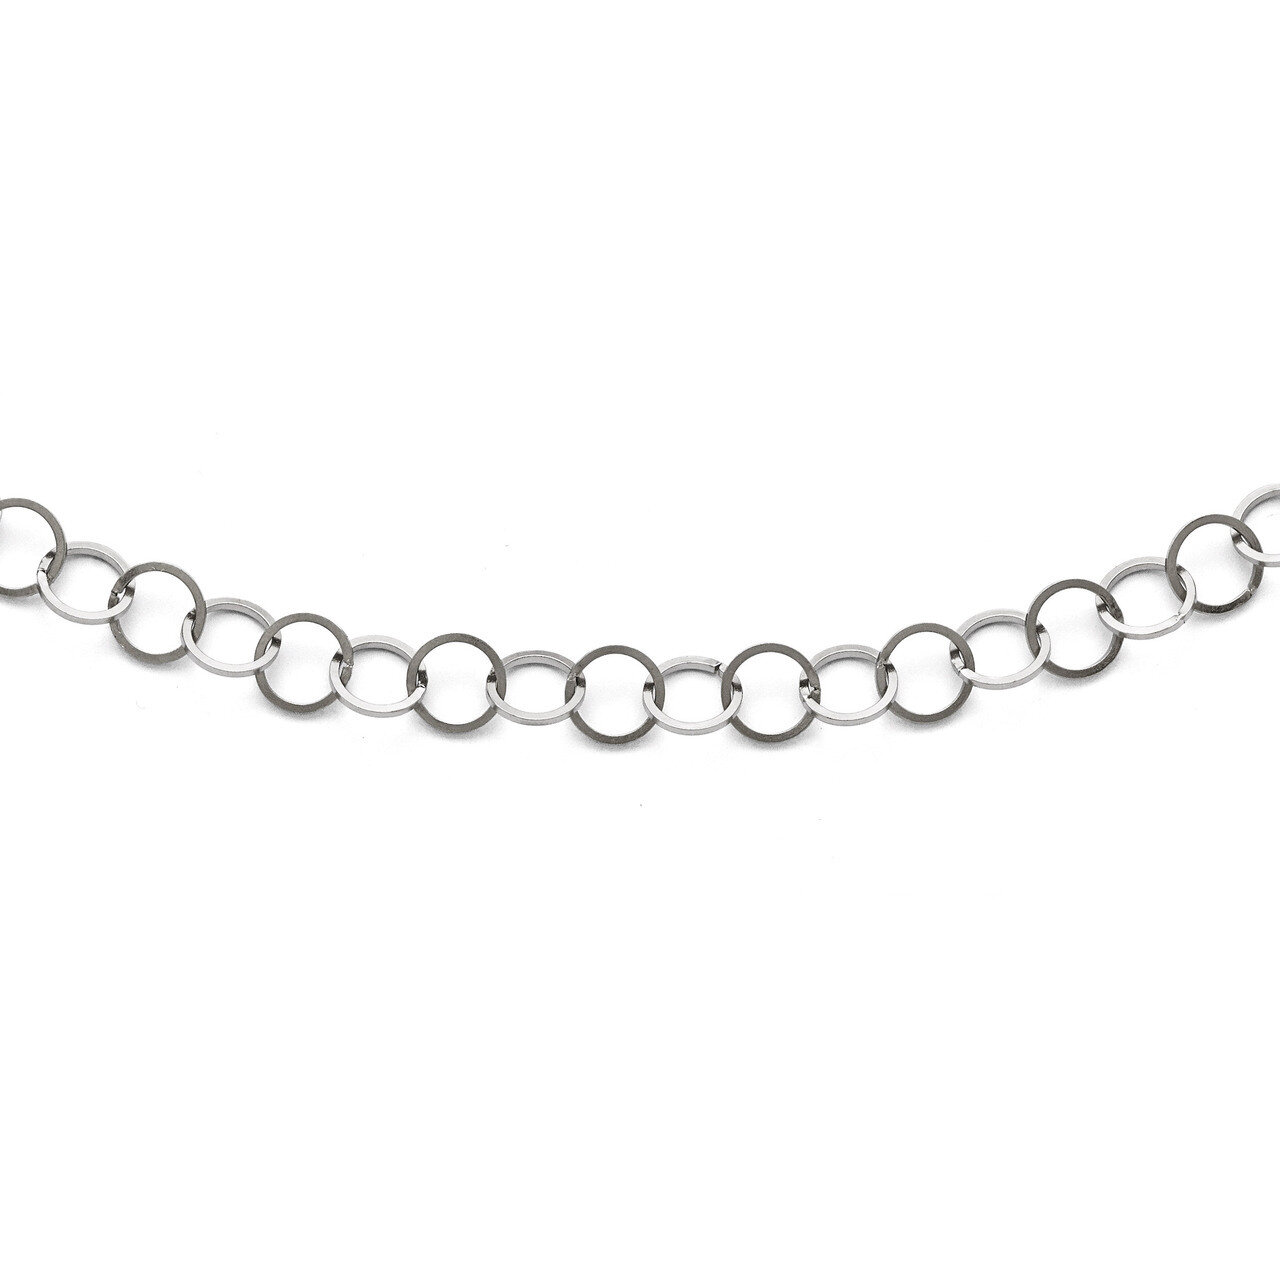 Polished 8MM Circle Link Necklace - Stainless Steel SRN1568